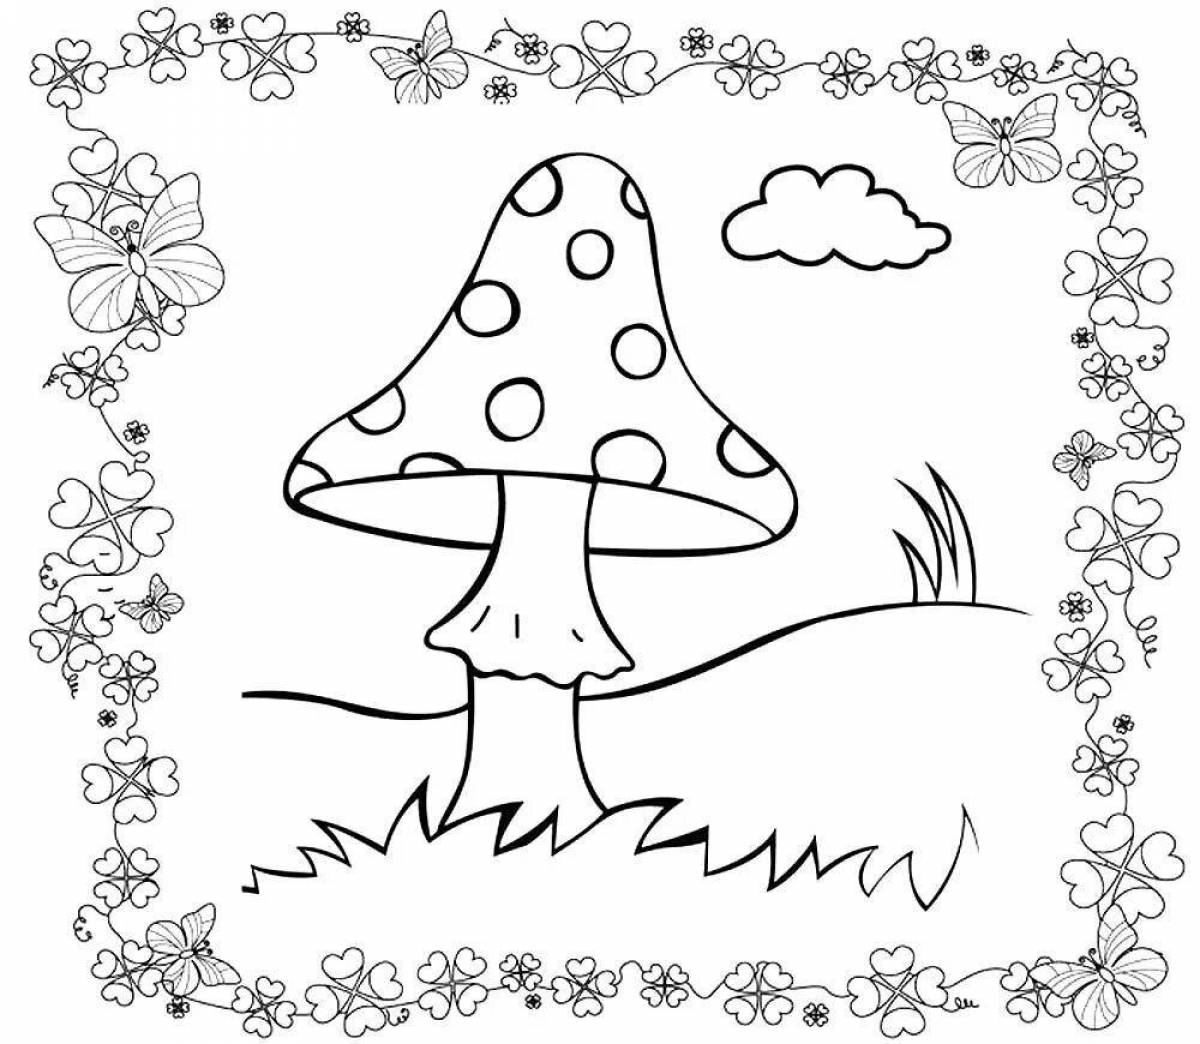 Great toadstool coloring page